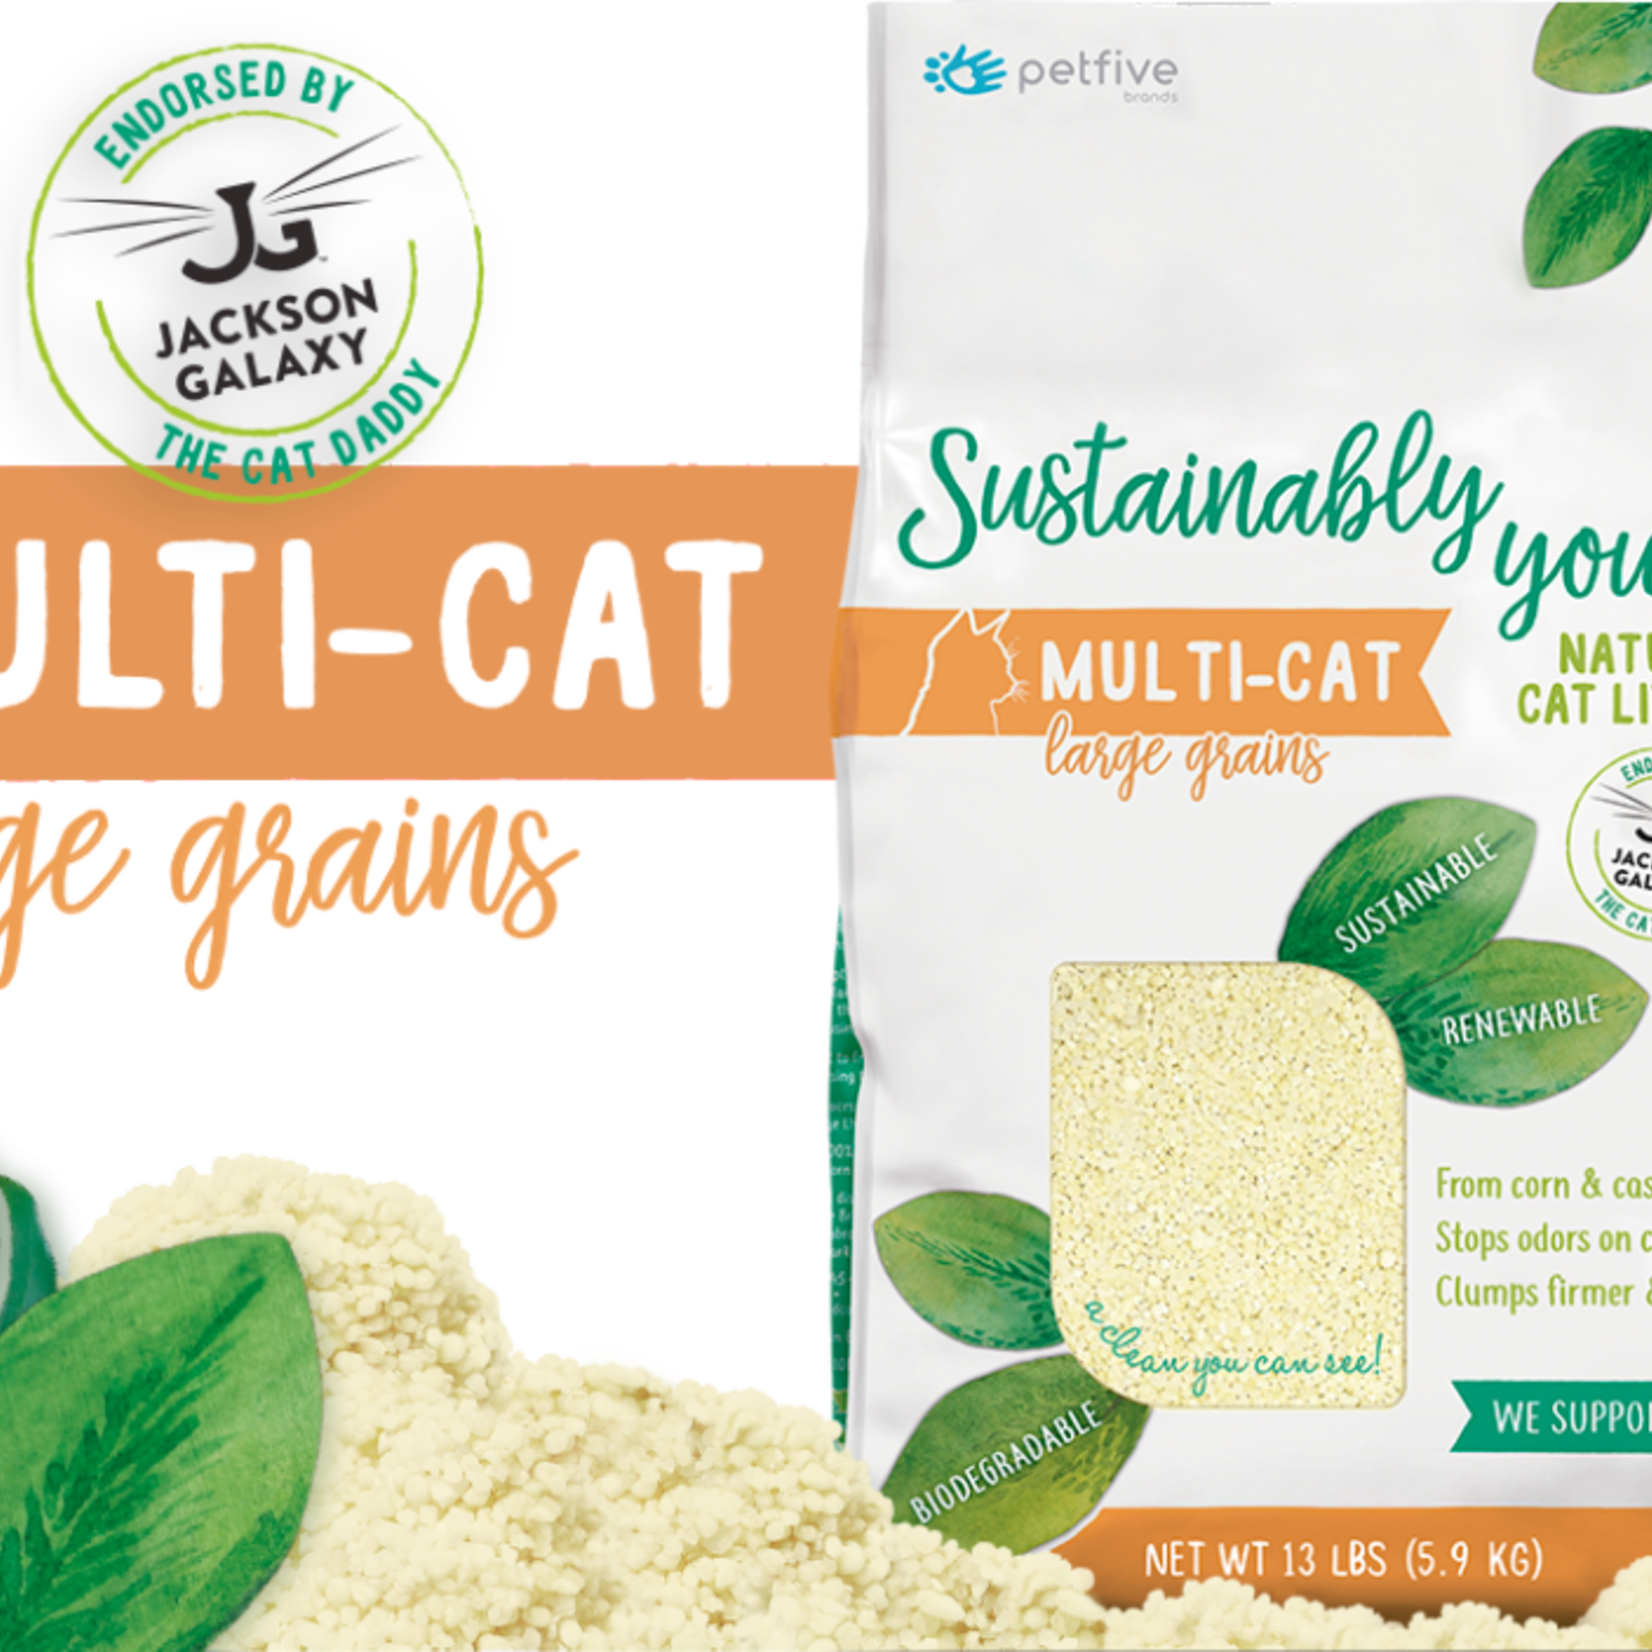 Sustainably Yours Sustainably Yours Cat Litter Large Grain 26#